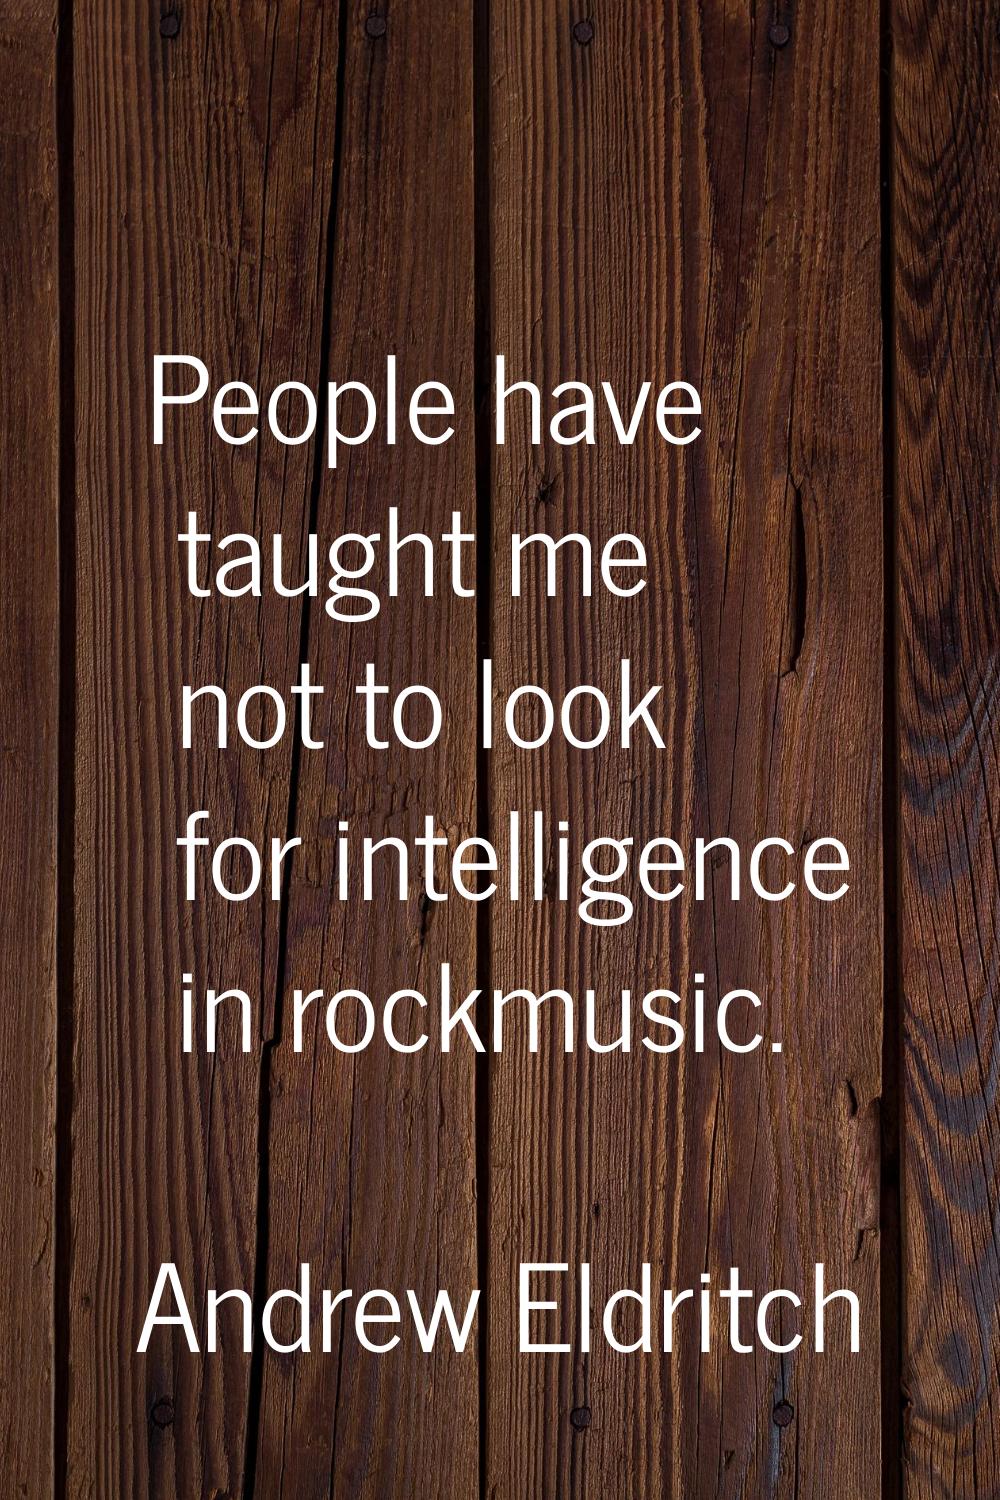 People have taught me not to look for intelligence in rockmusic.